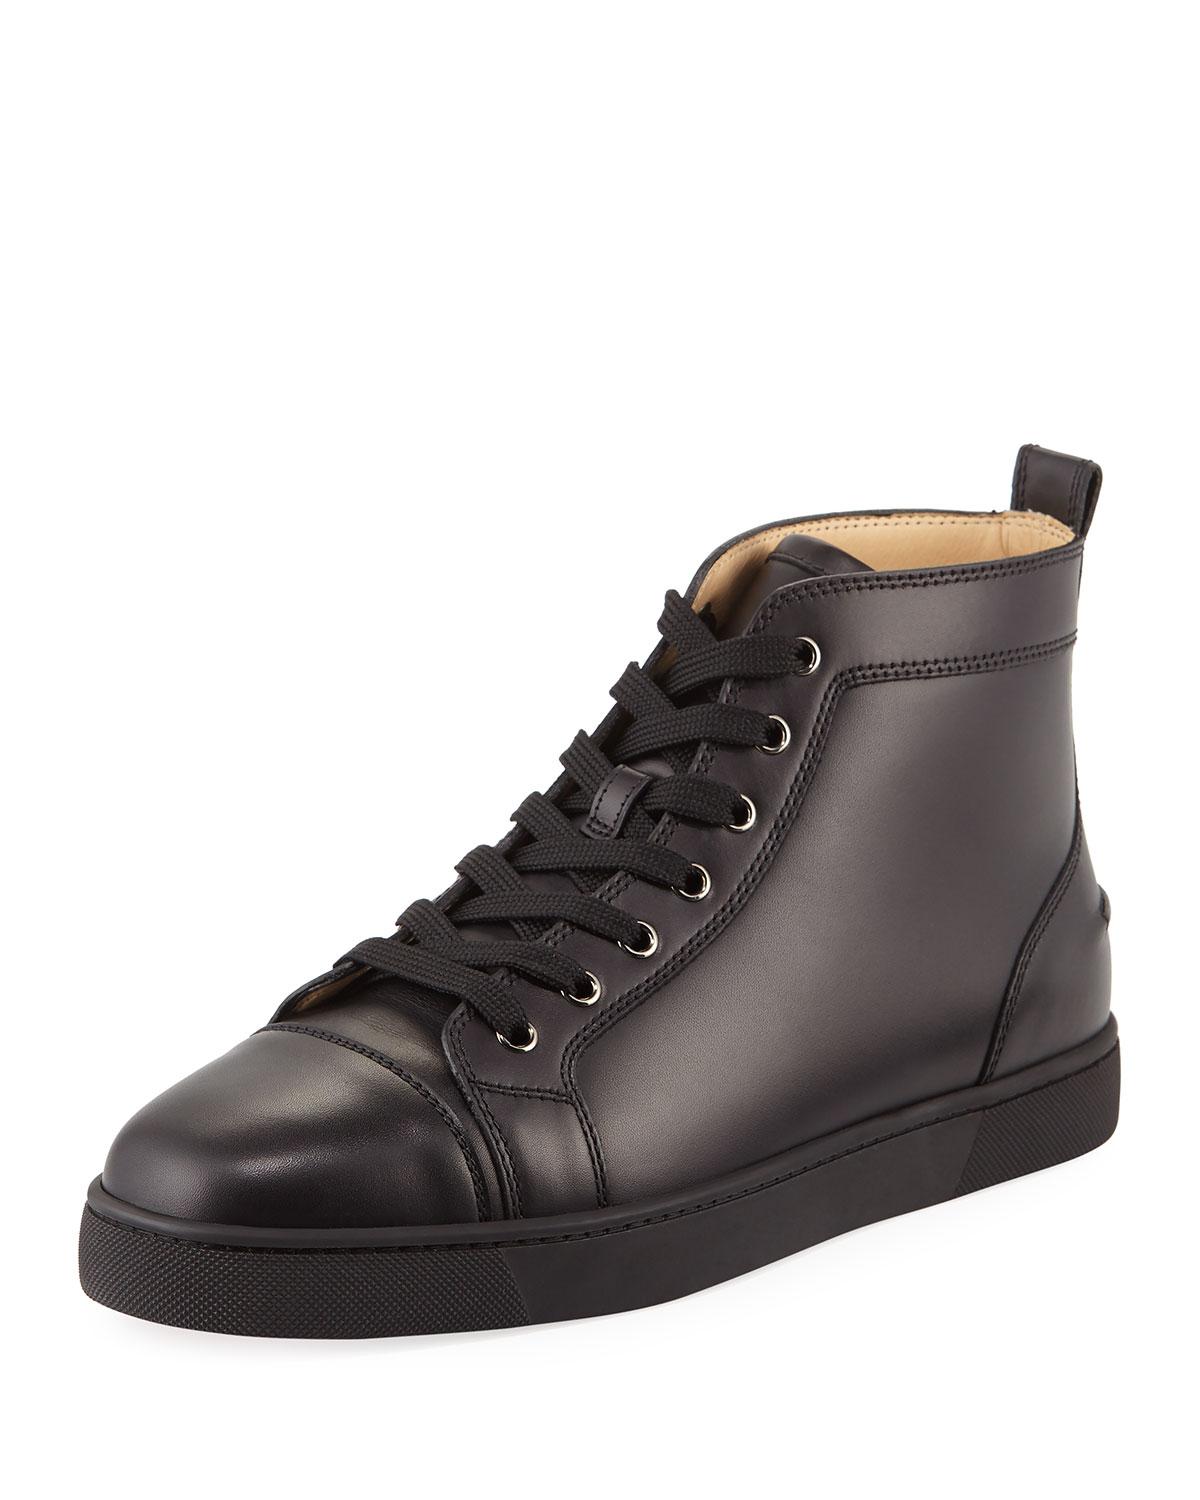 Lyst - Christian Louboutin Men's Louis Leather High-top Sneakers in ...